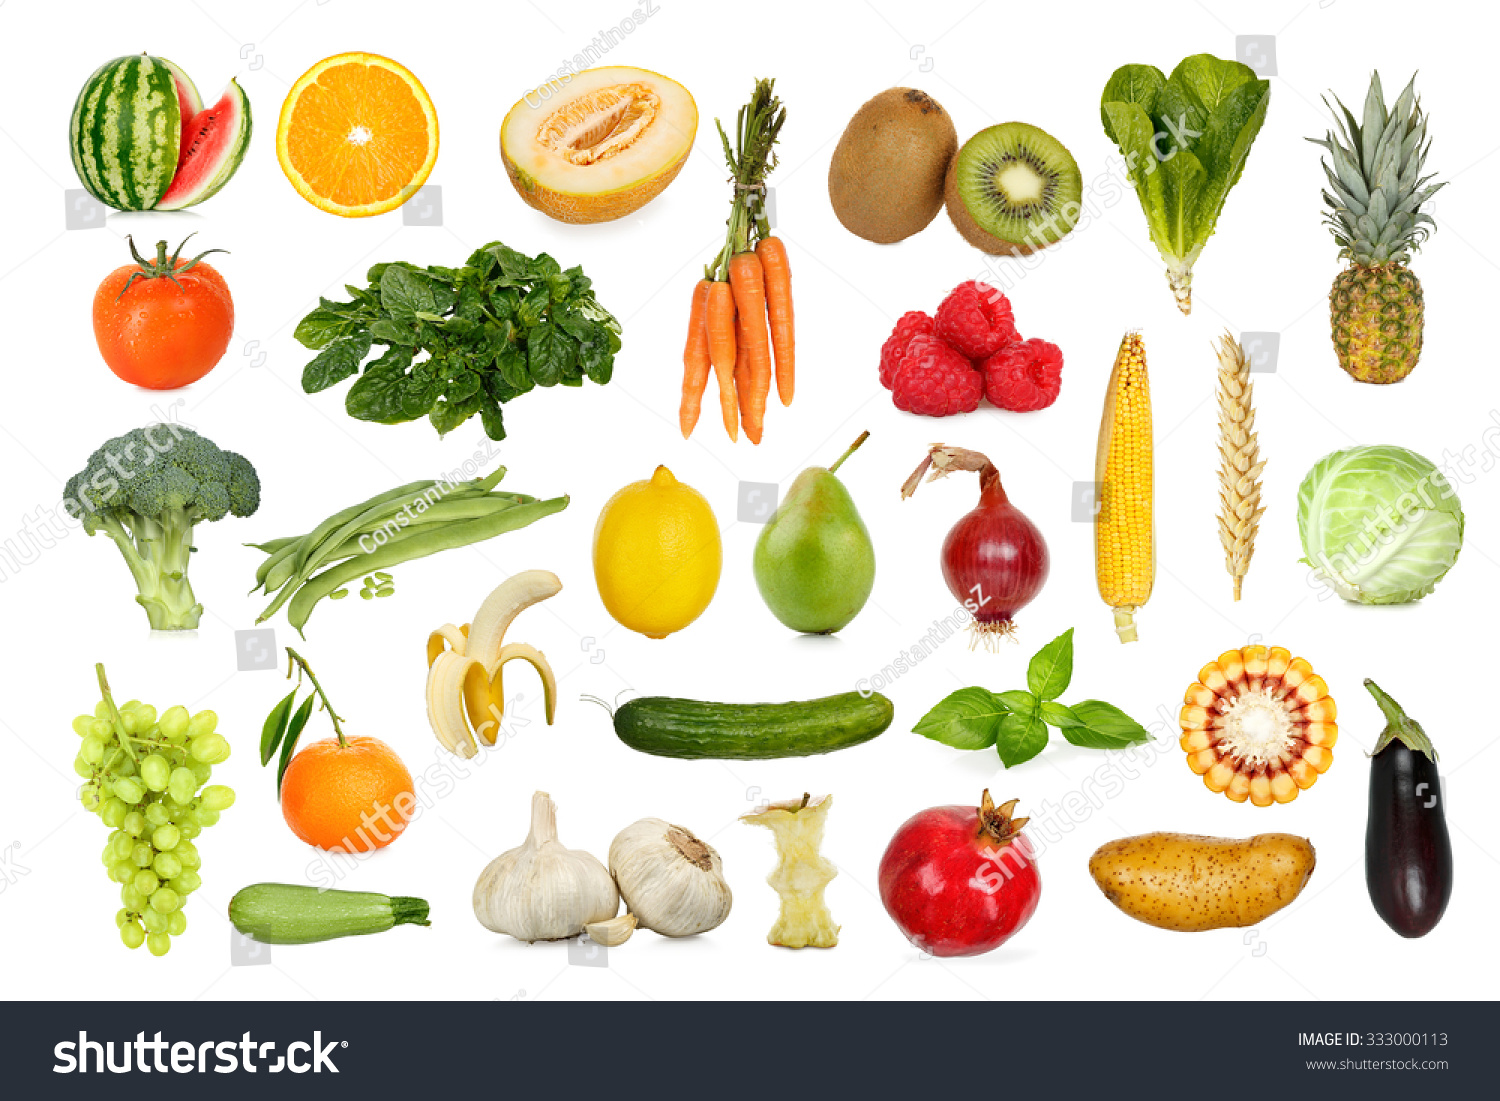 collection of fruits and vegetables isolated on white #333000113